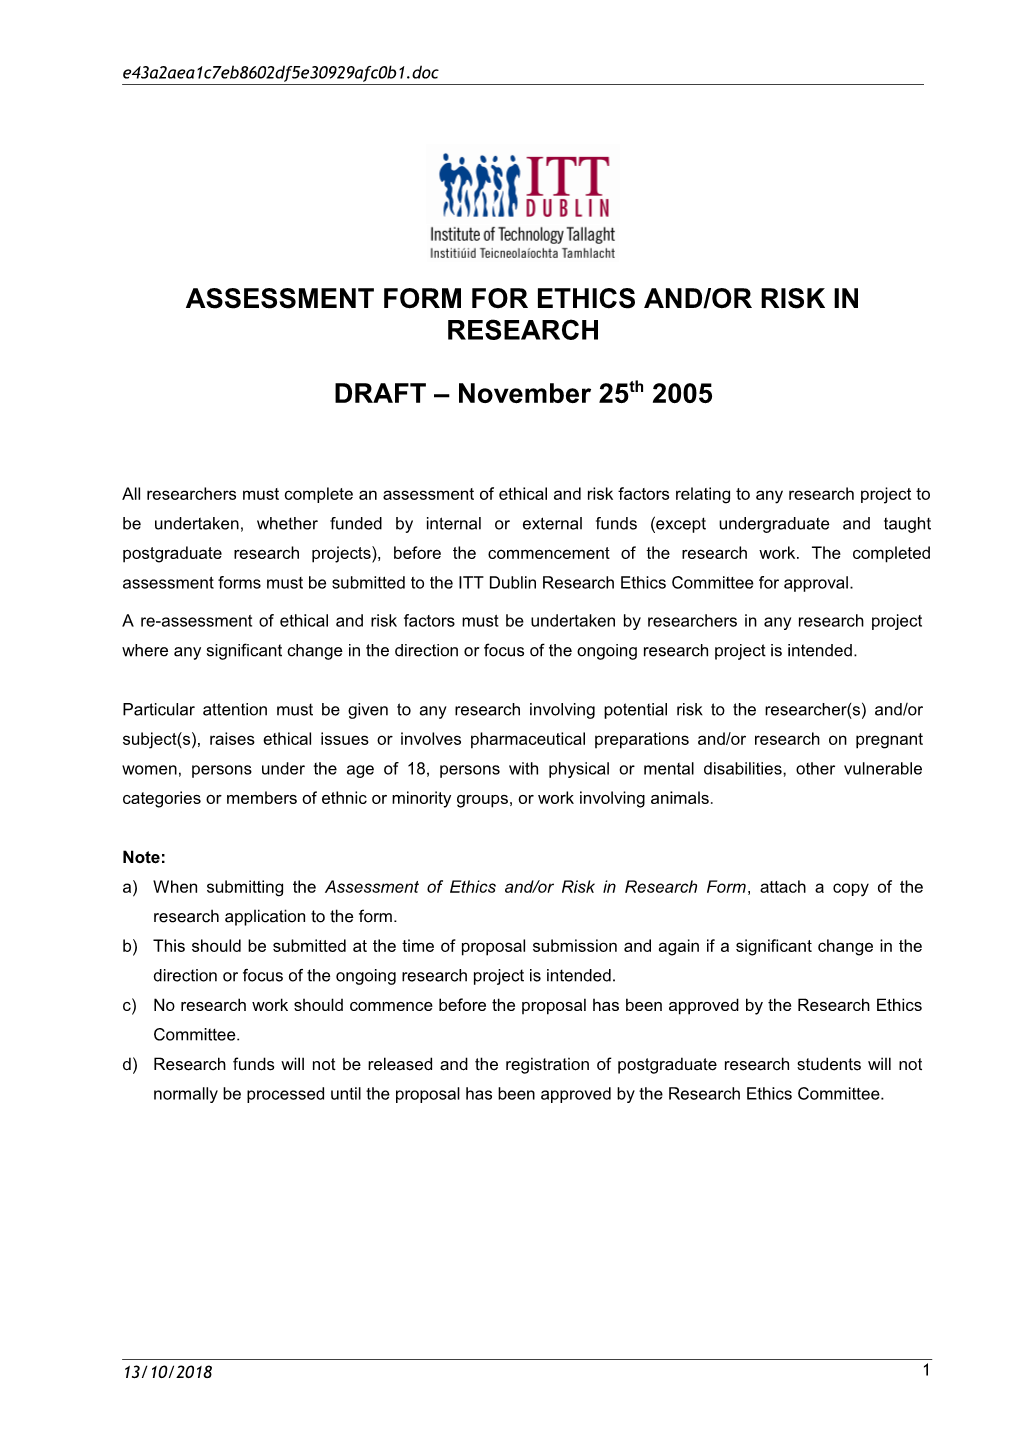 Assessment of Risk And/Or Research Ethics Form